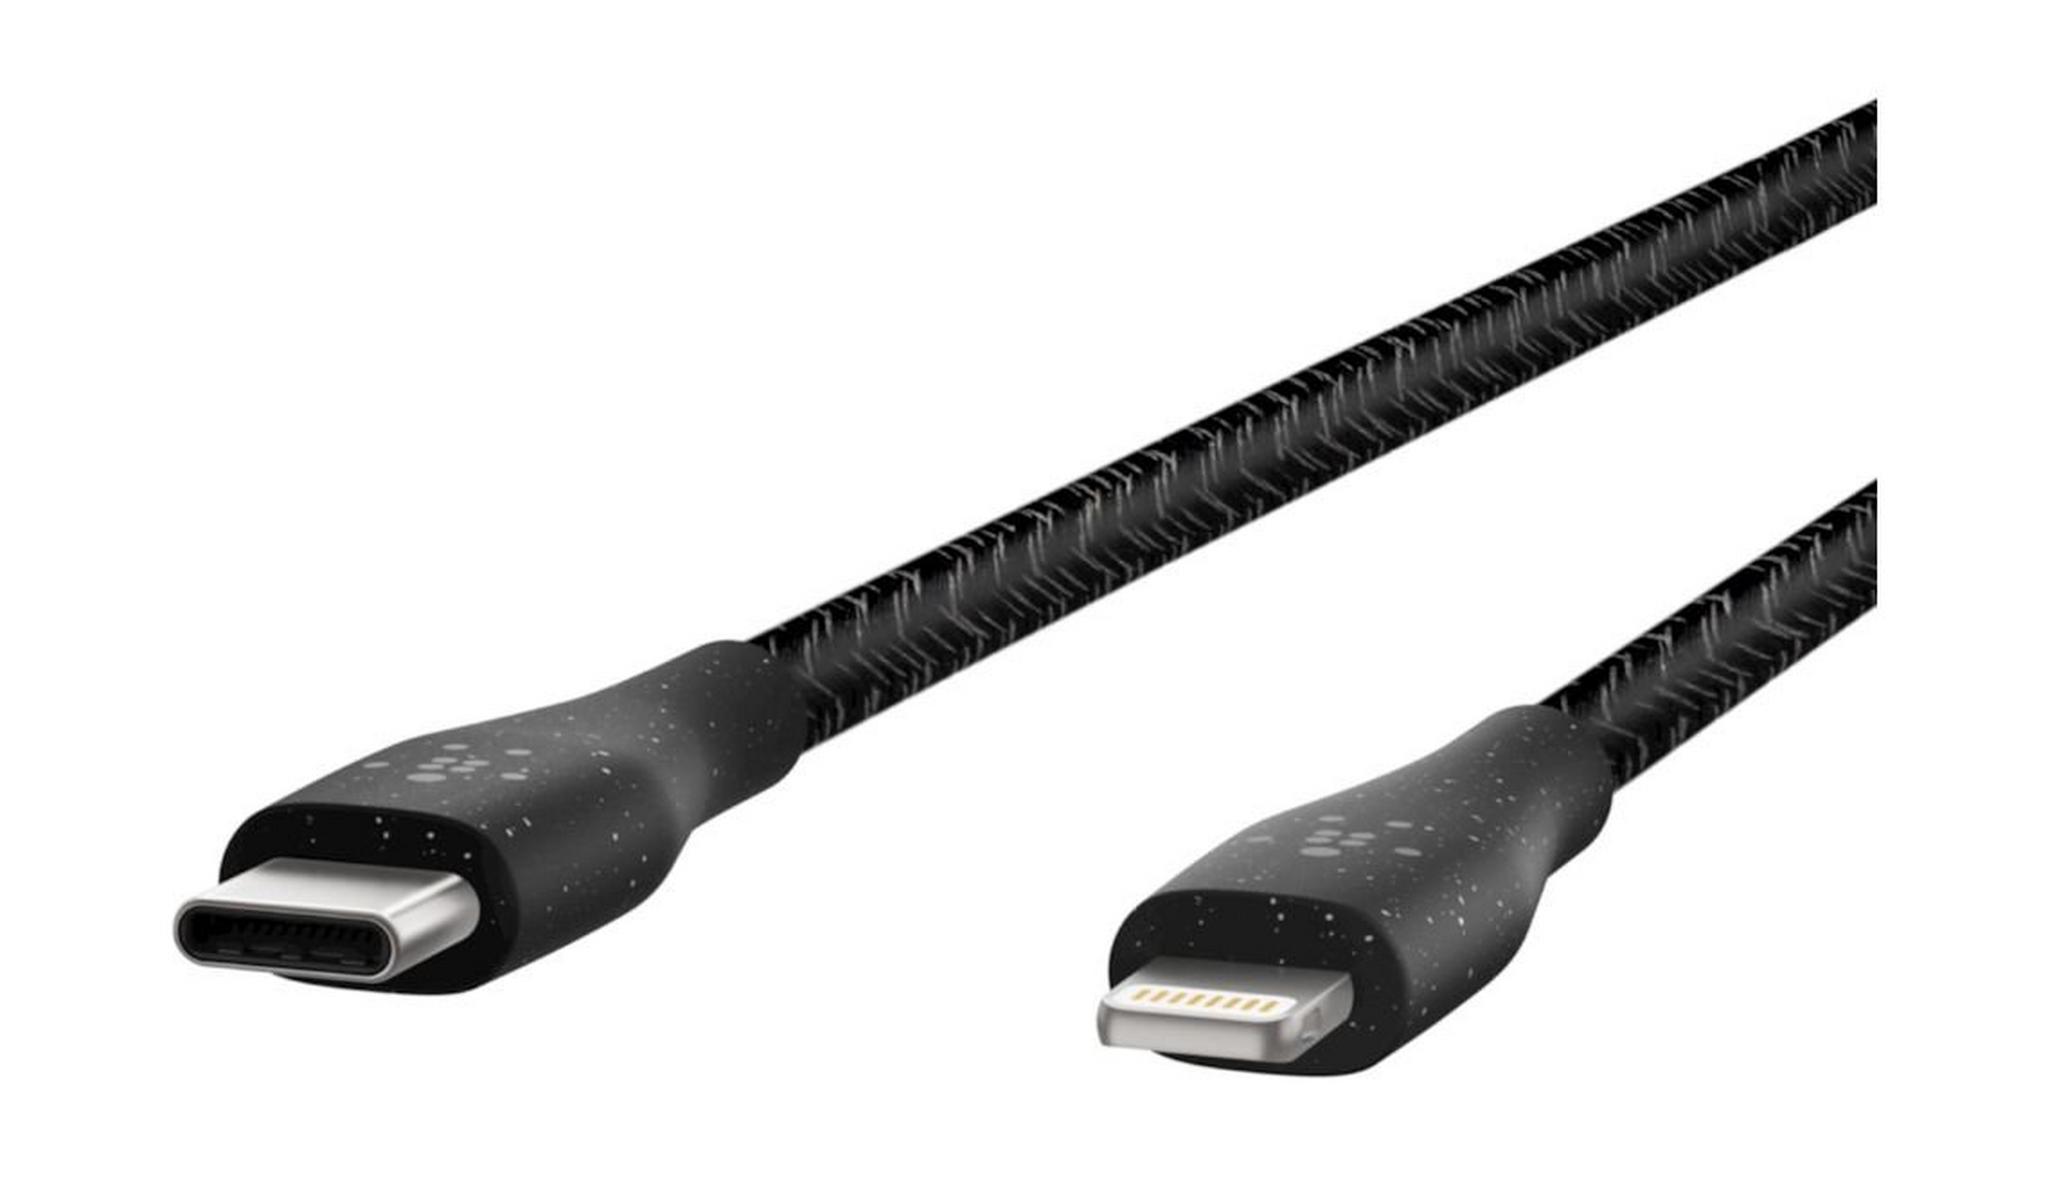 Belkin Boost Charge USB-C Cable With Lightning Connector + Duratek Strap